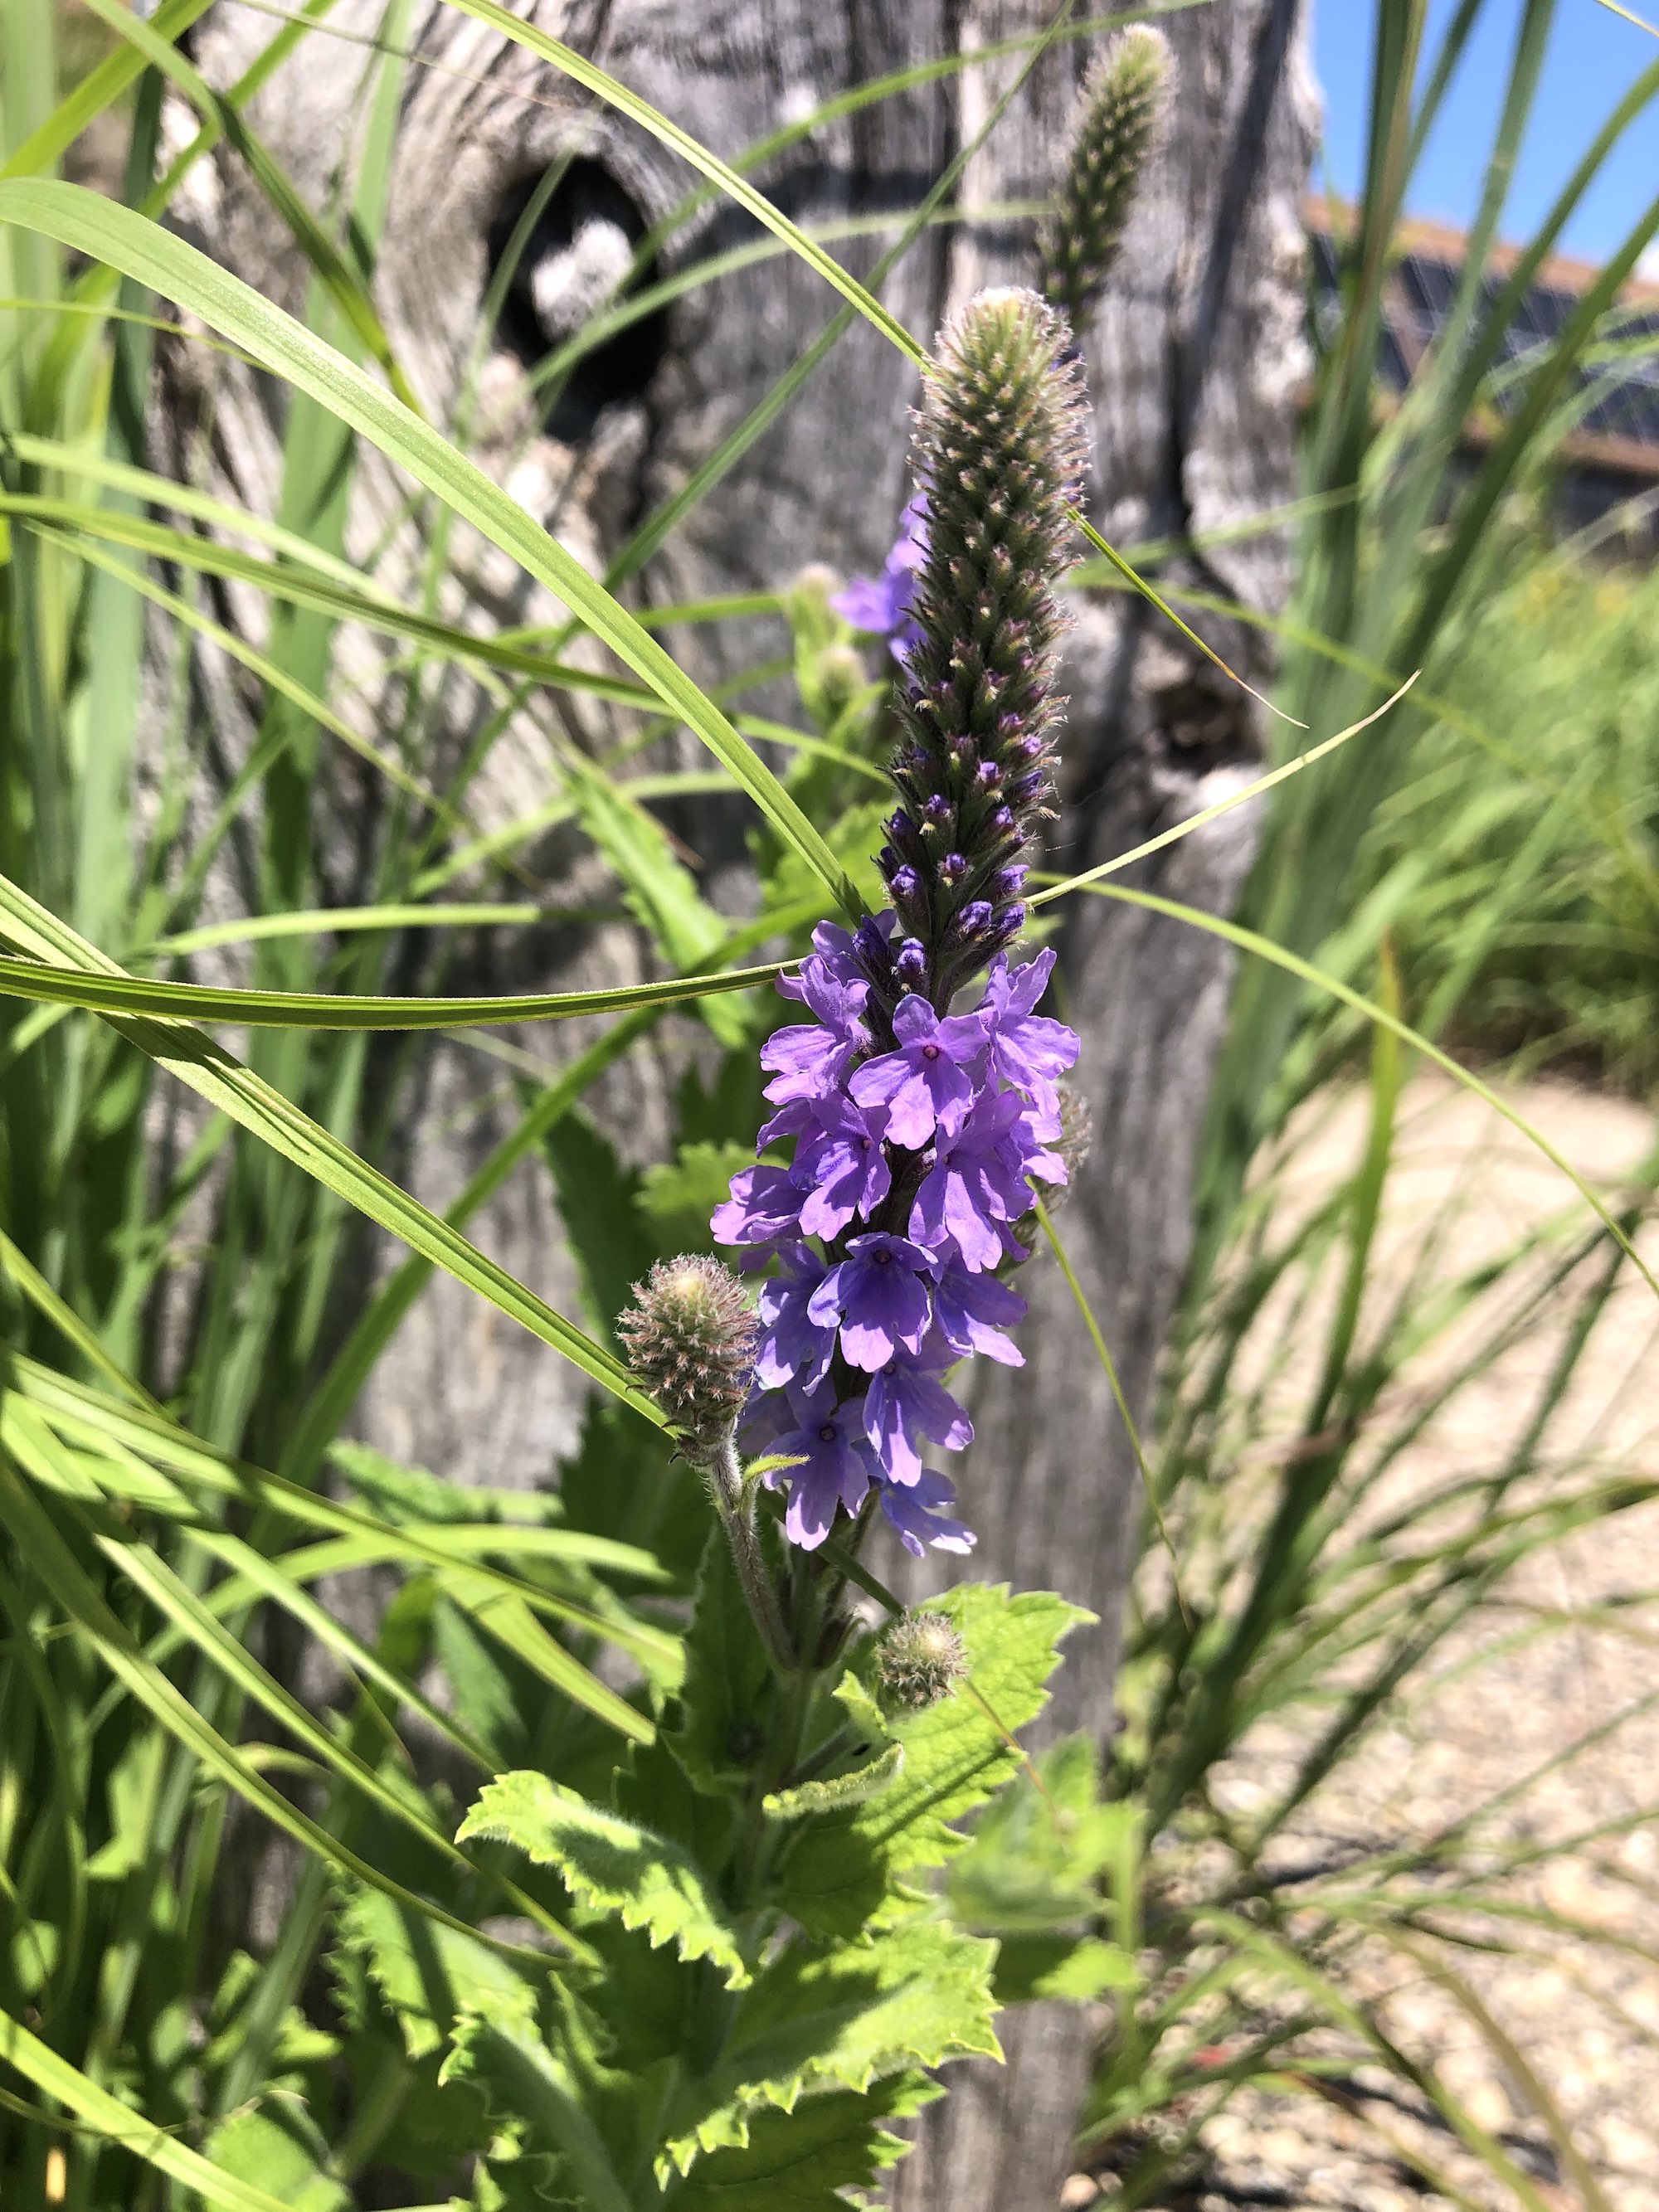 Hoary Vervain next to the UW Arboretum Visitors Center parking lot on June 19, 2021.